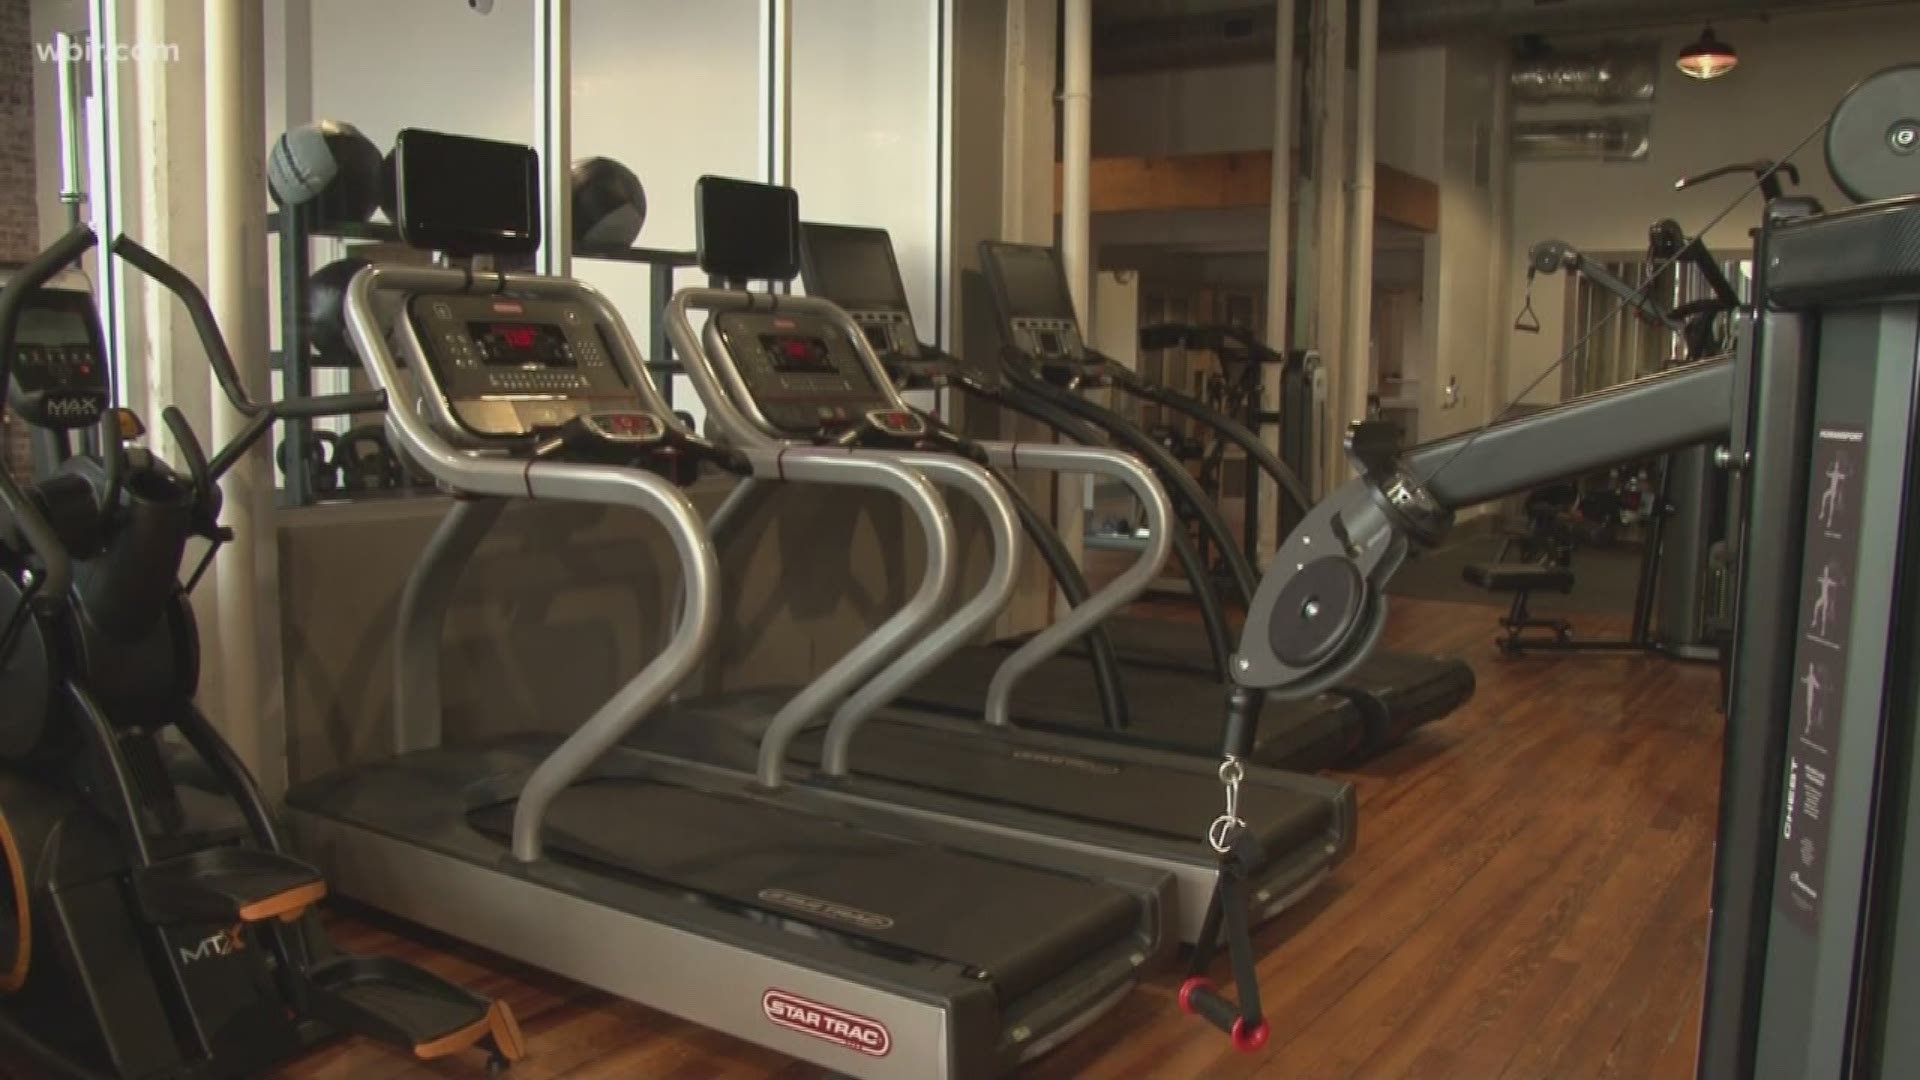 Local gym owners say a tax makes it more expensive than it should be, giving people one more reason not to go.